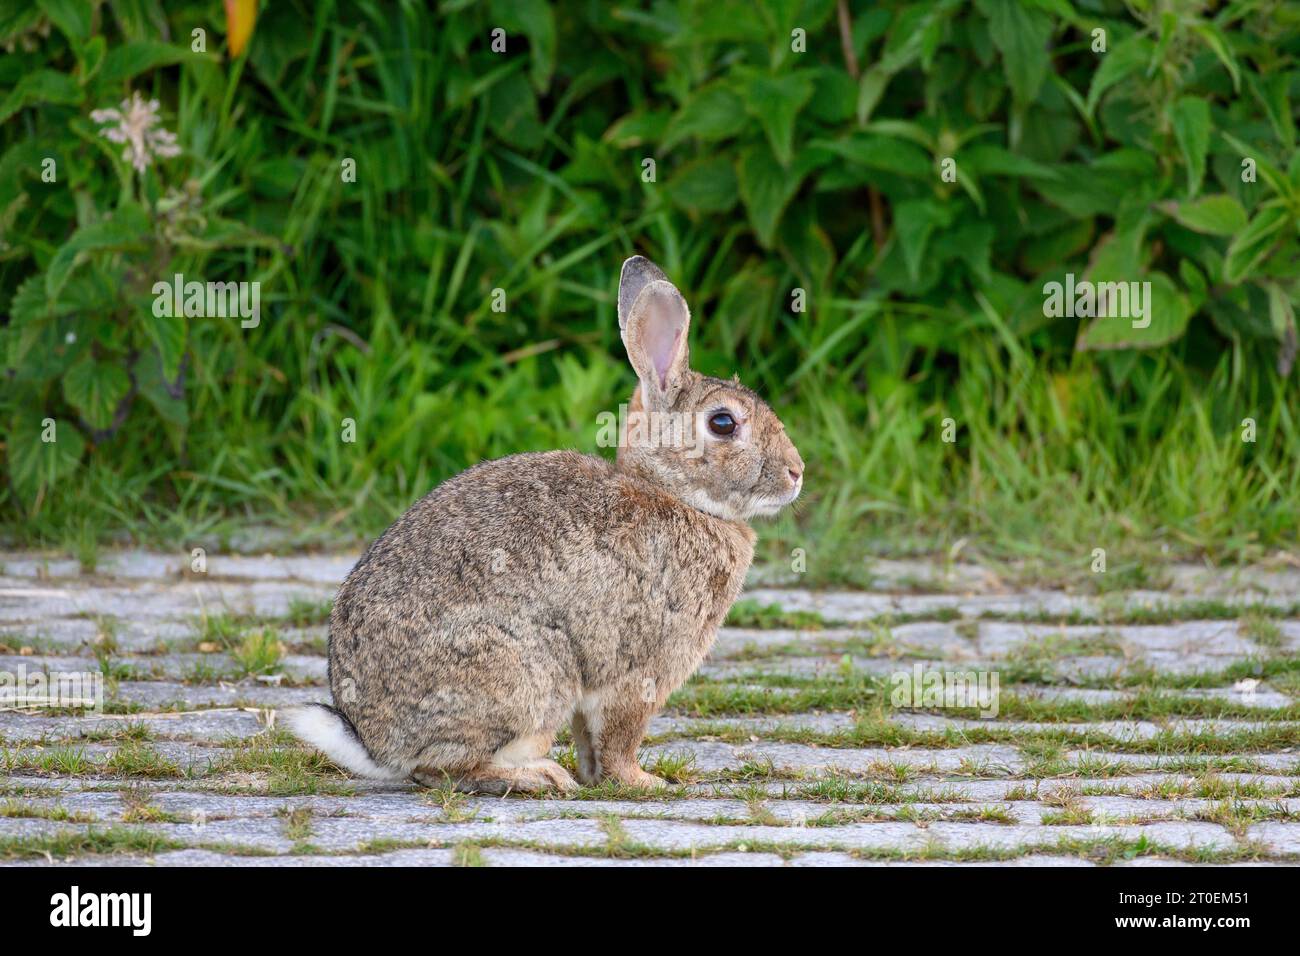 Rabbits from the family of hares (Leporidae). Stock Photo